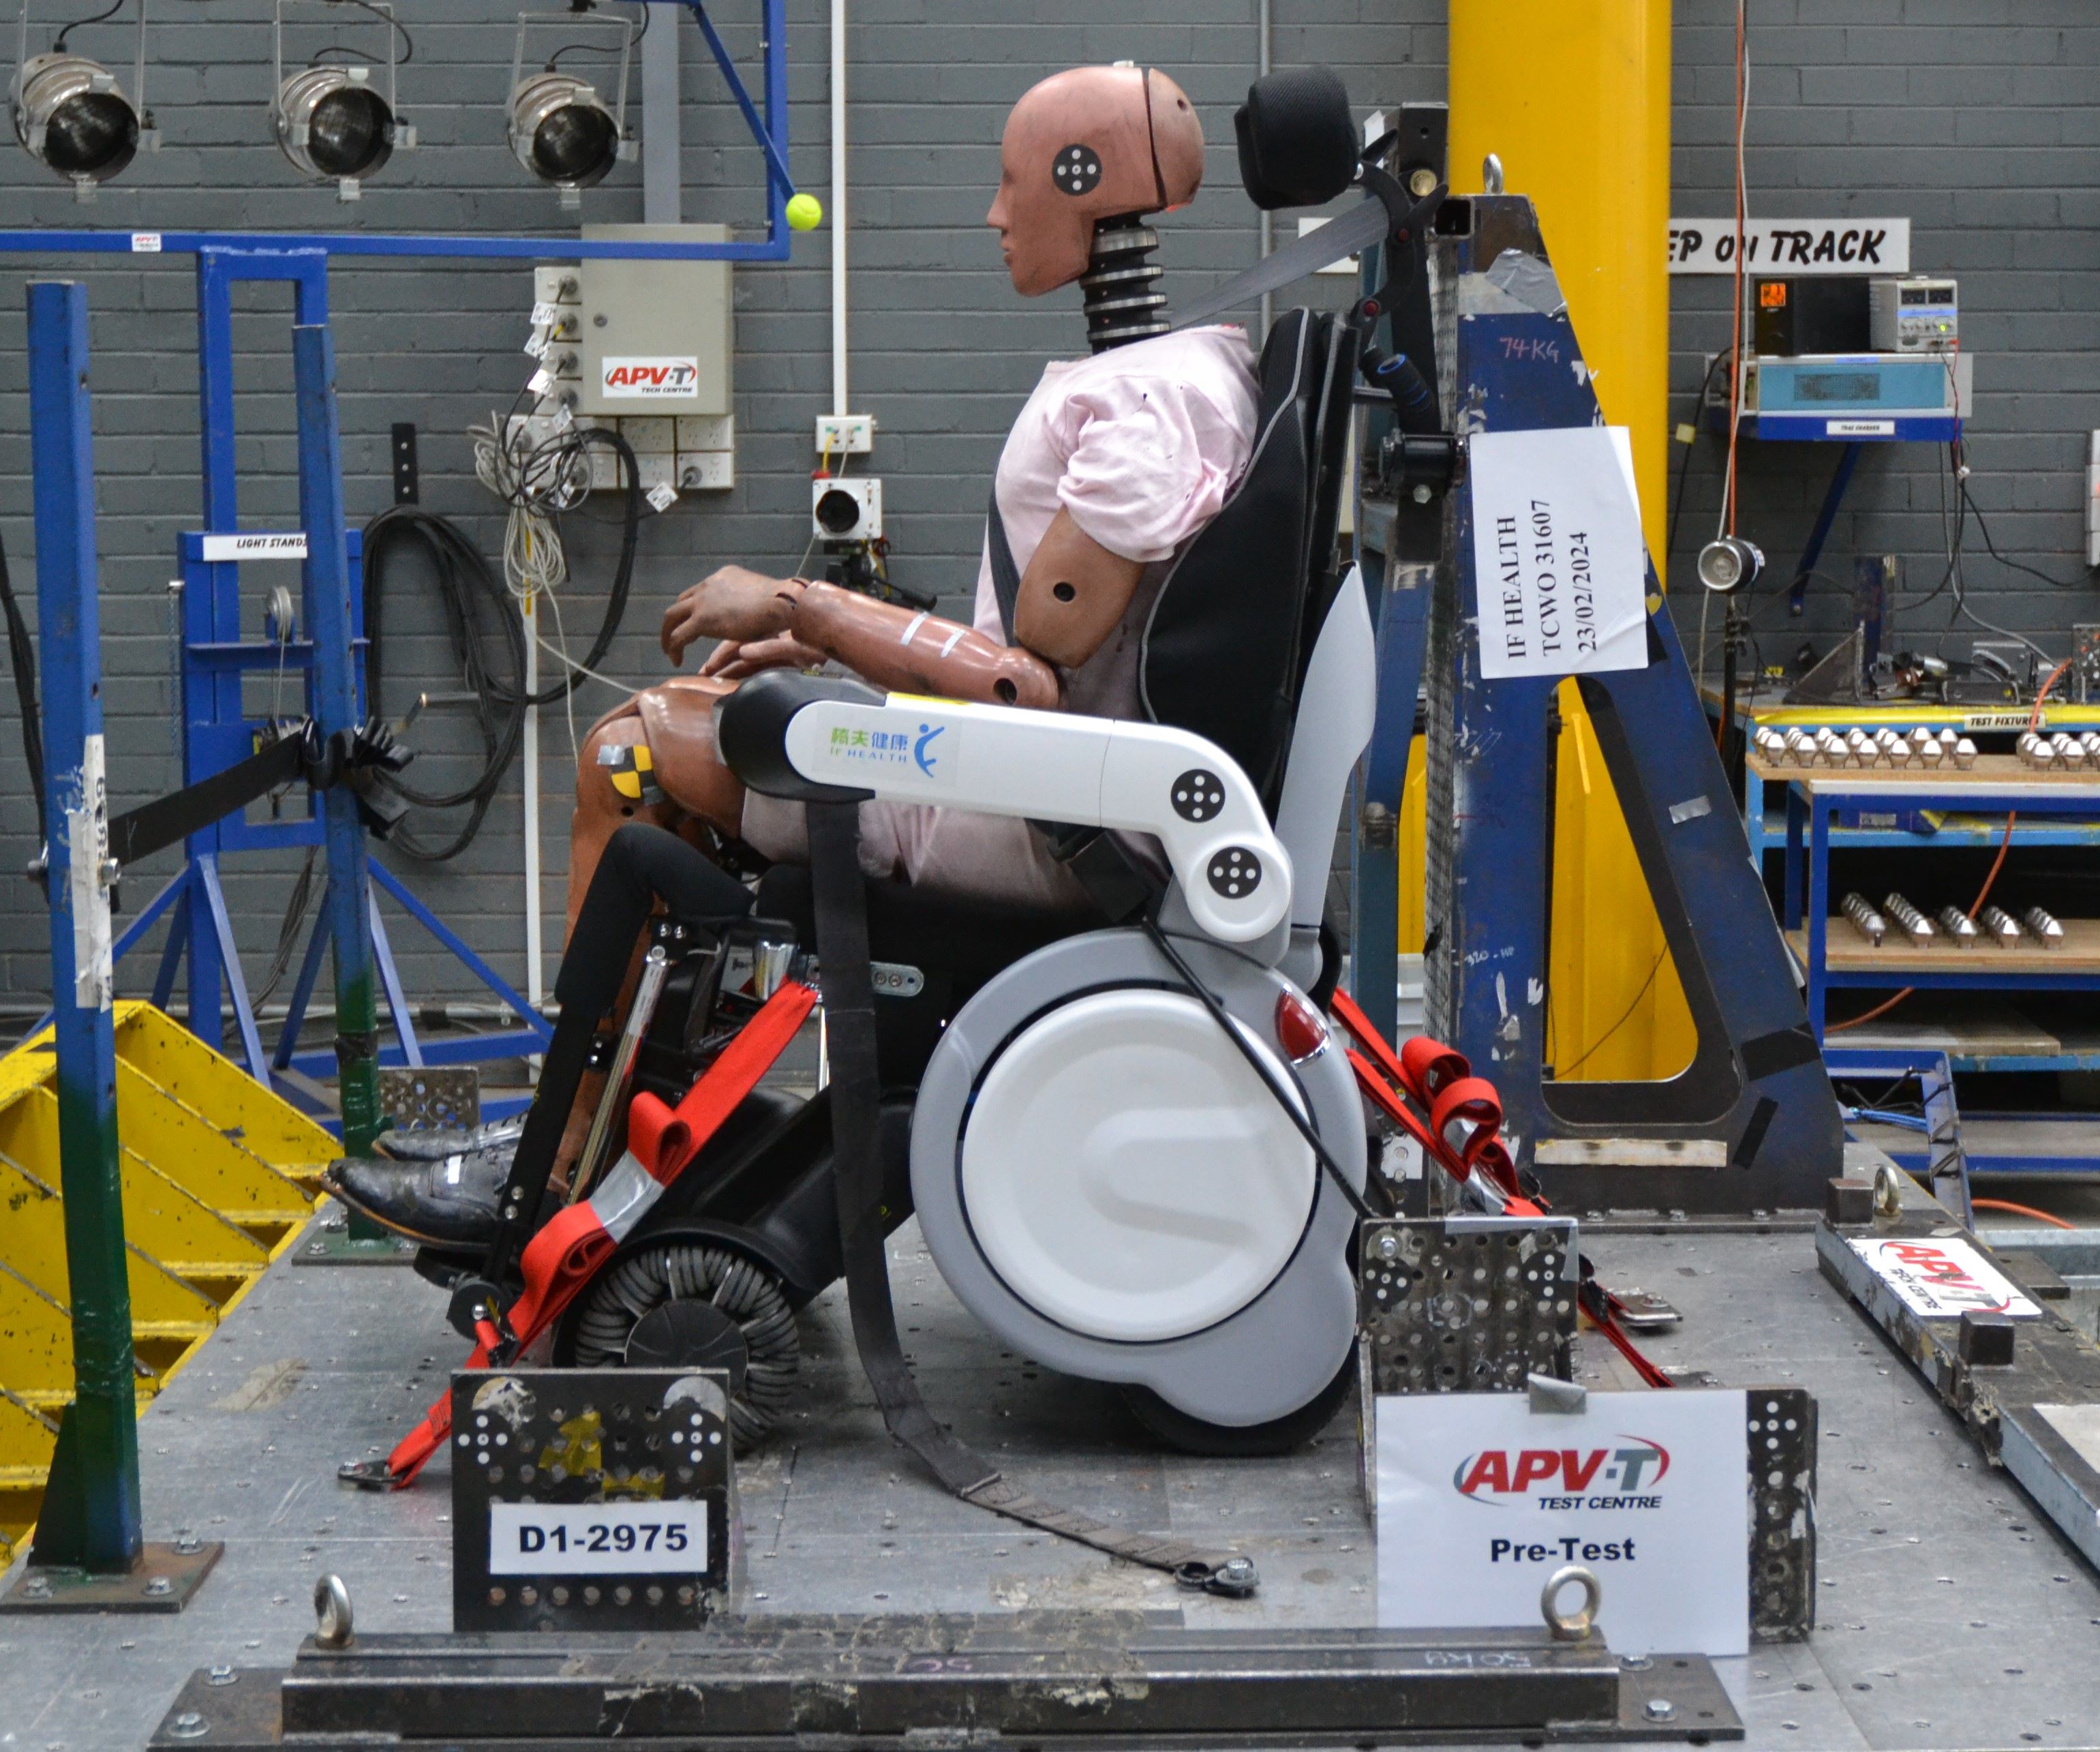 Safety Meets Performance - IF HEALTH Wheelchair Receives Safety Certification From The APV